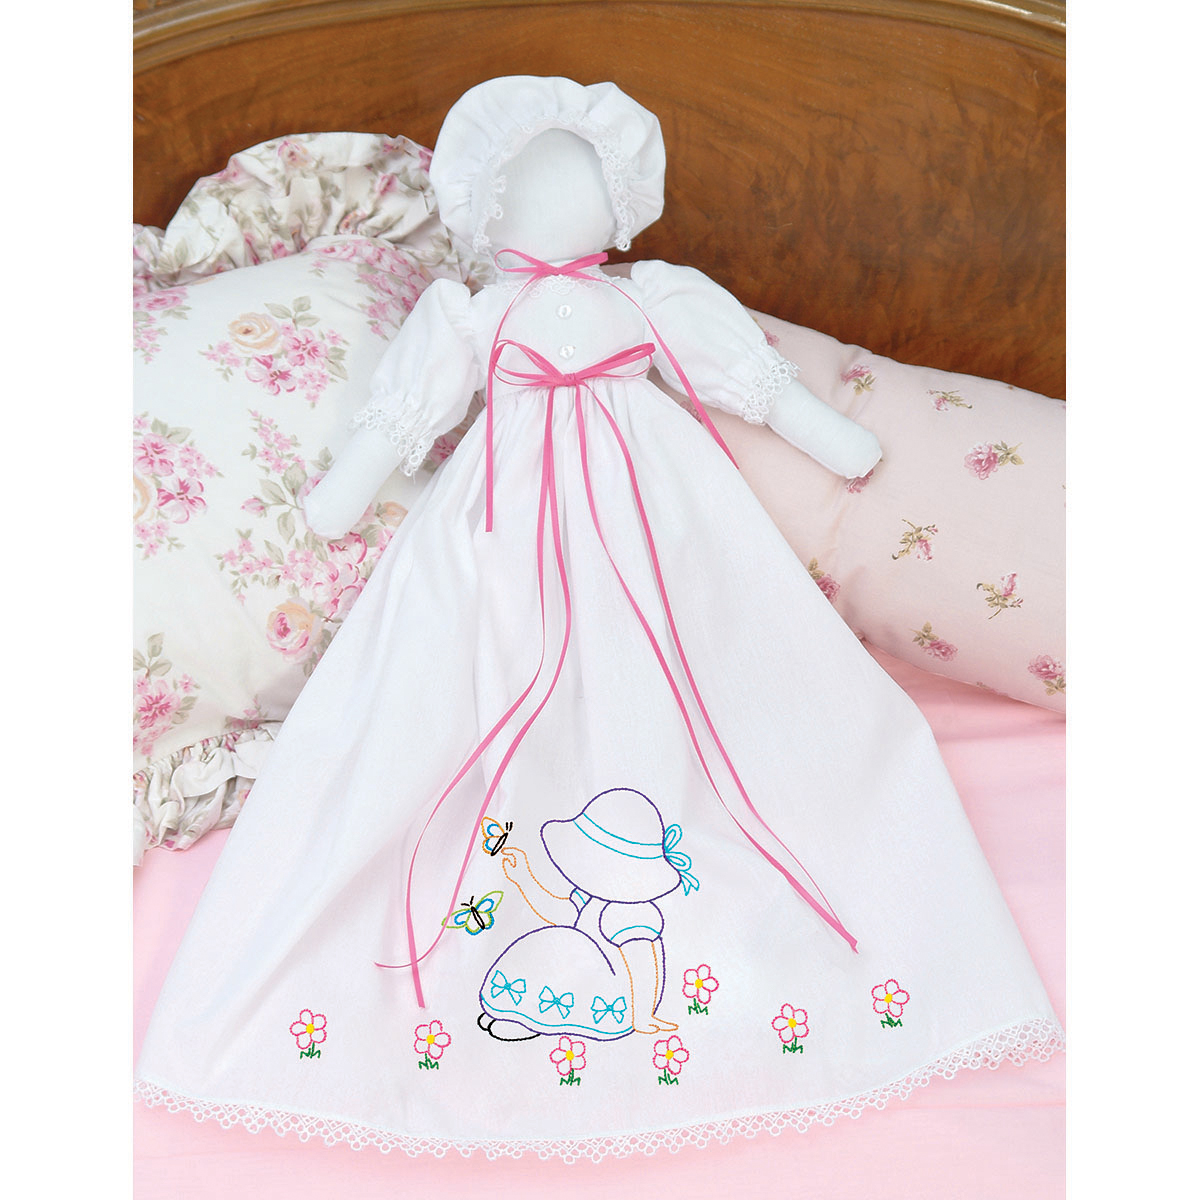 Jack Dempsey Stamped White Pillowcase Doll Kit-Sunbonnet Sue - image 2 of 2